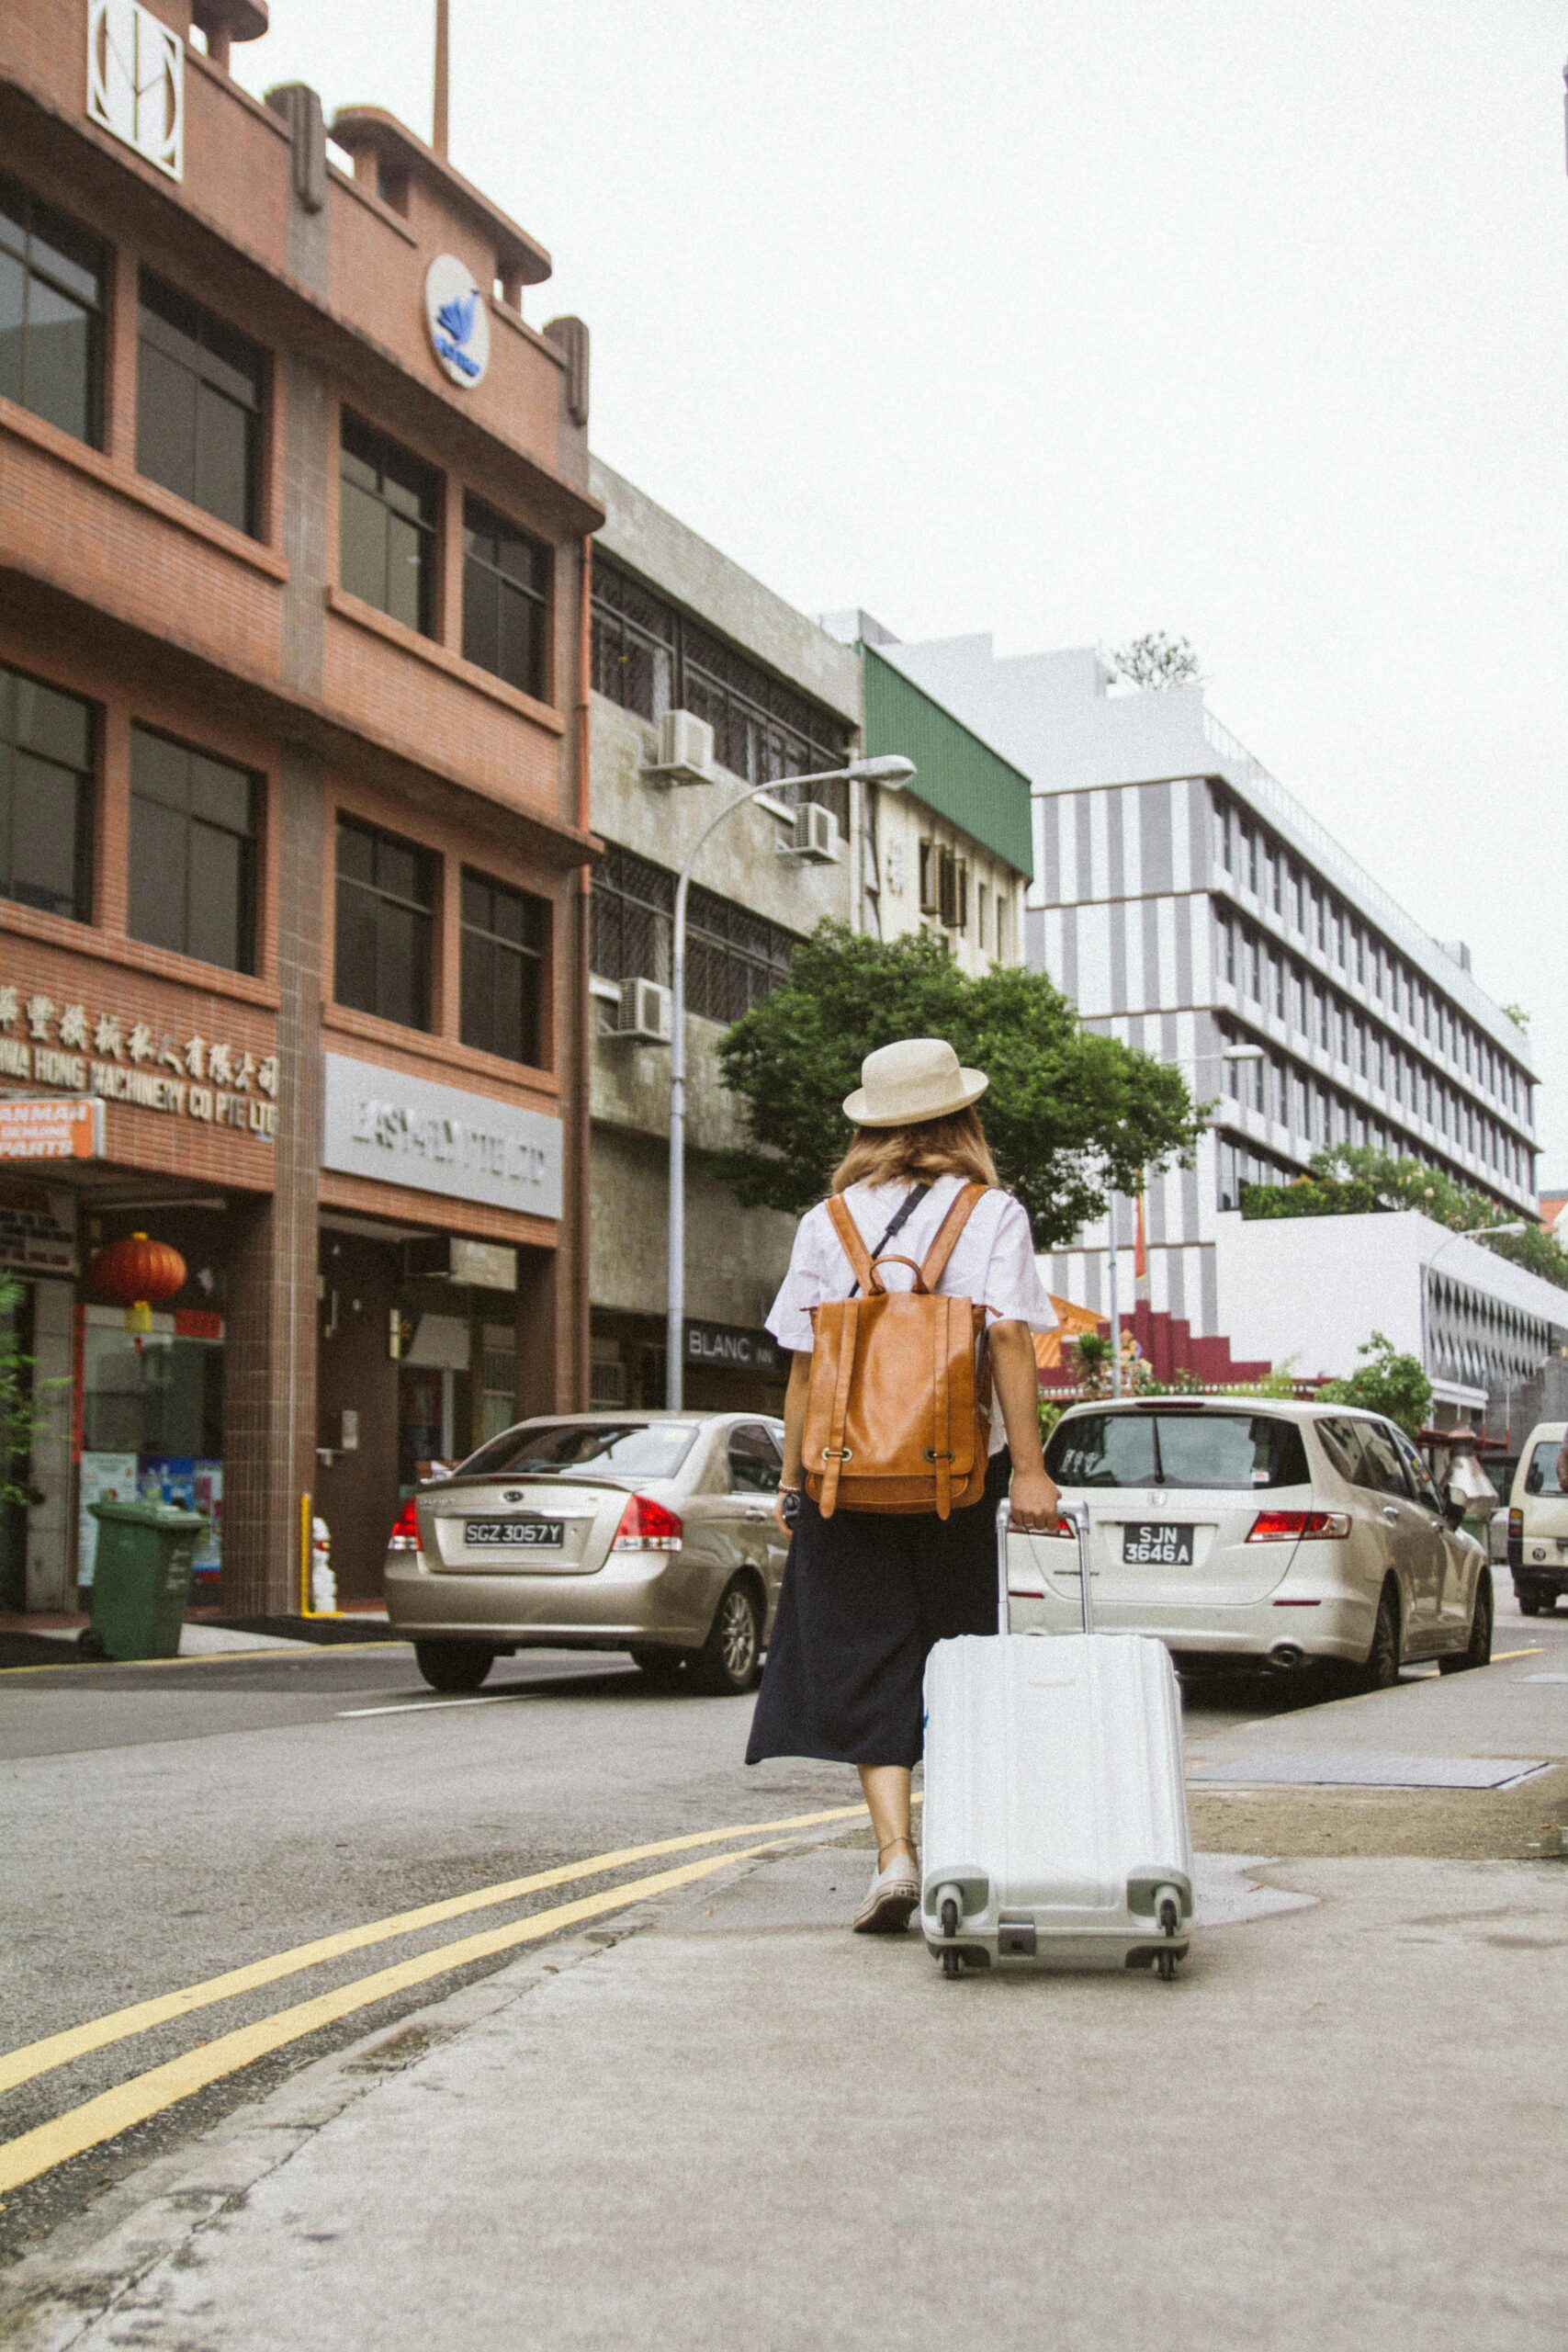 Woman leaving with her suitcase